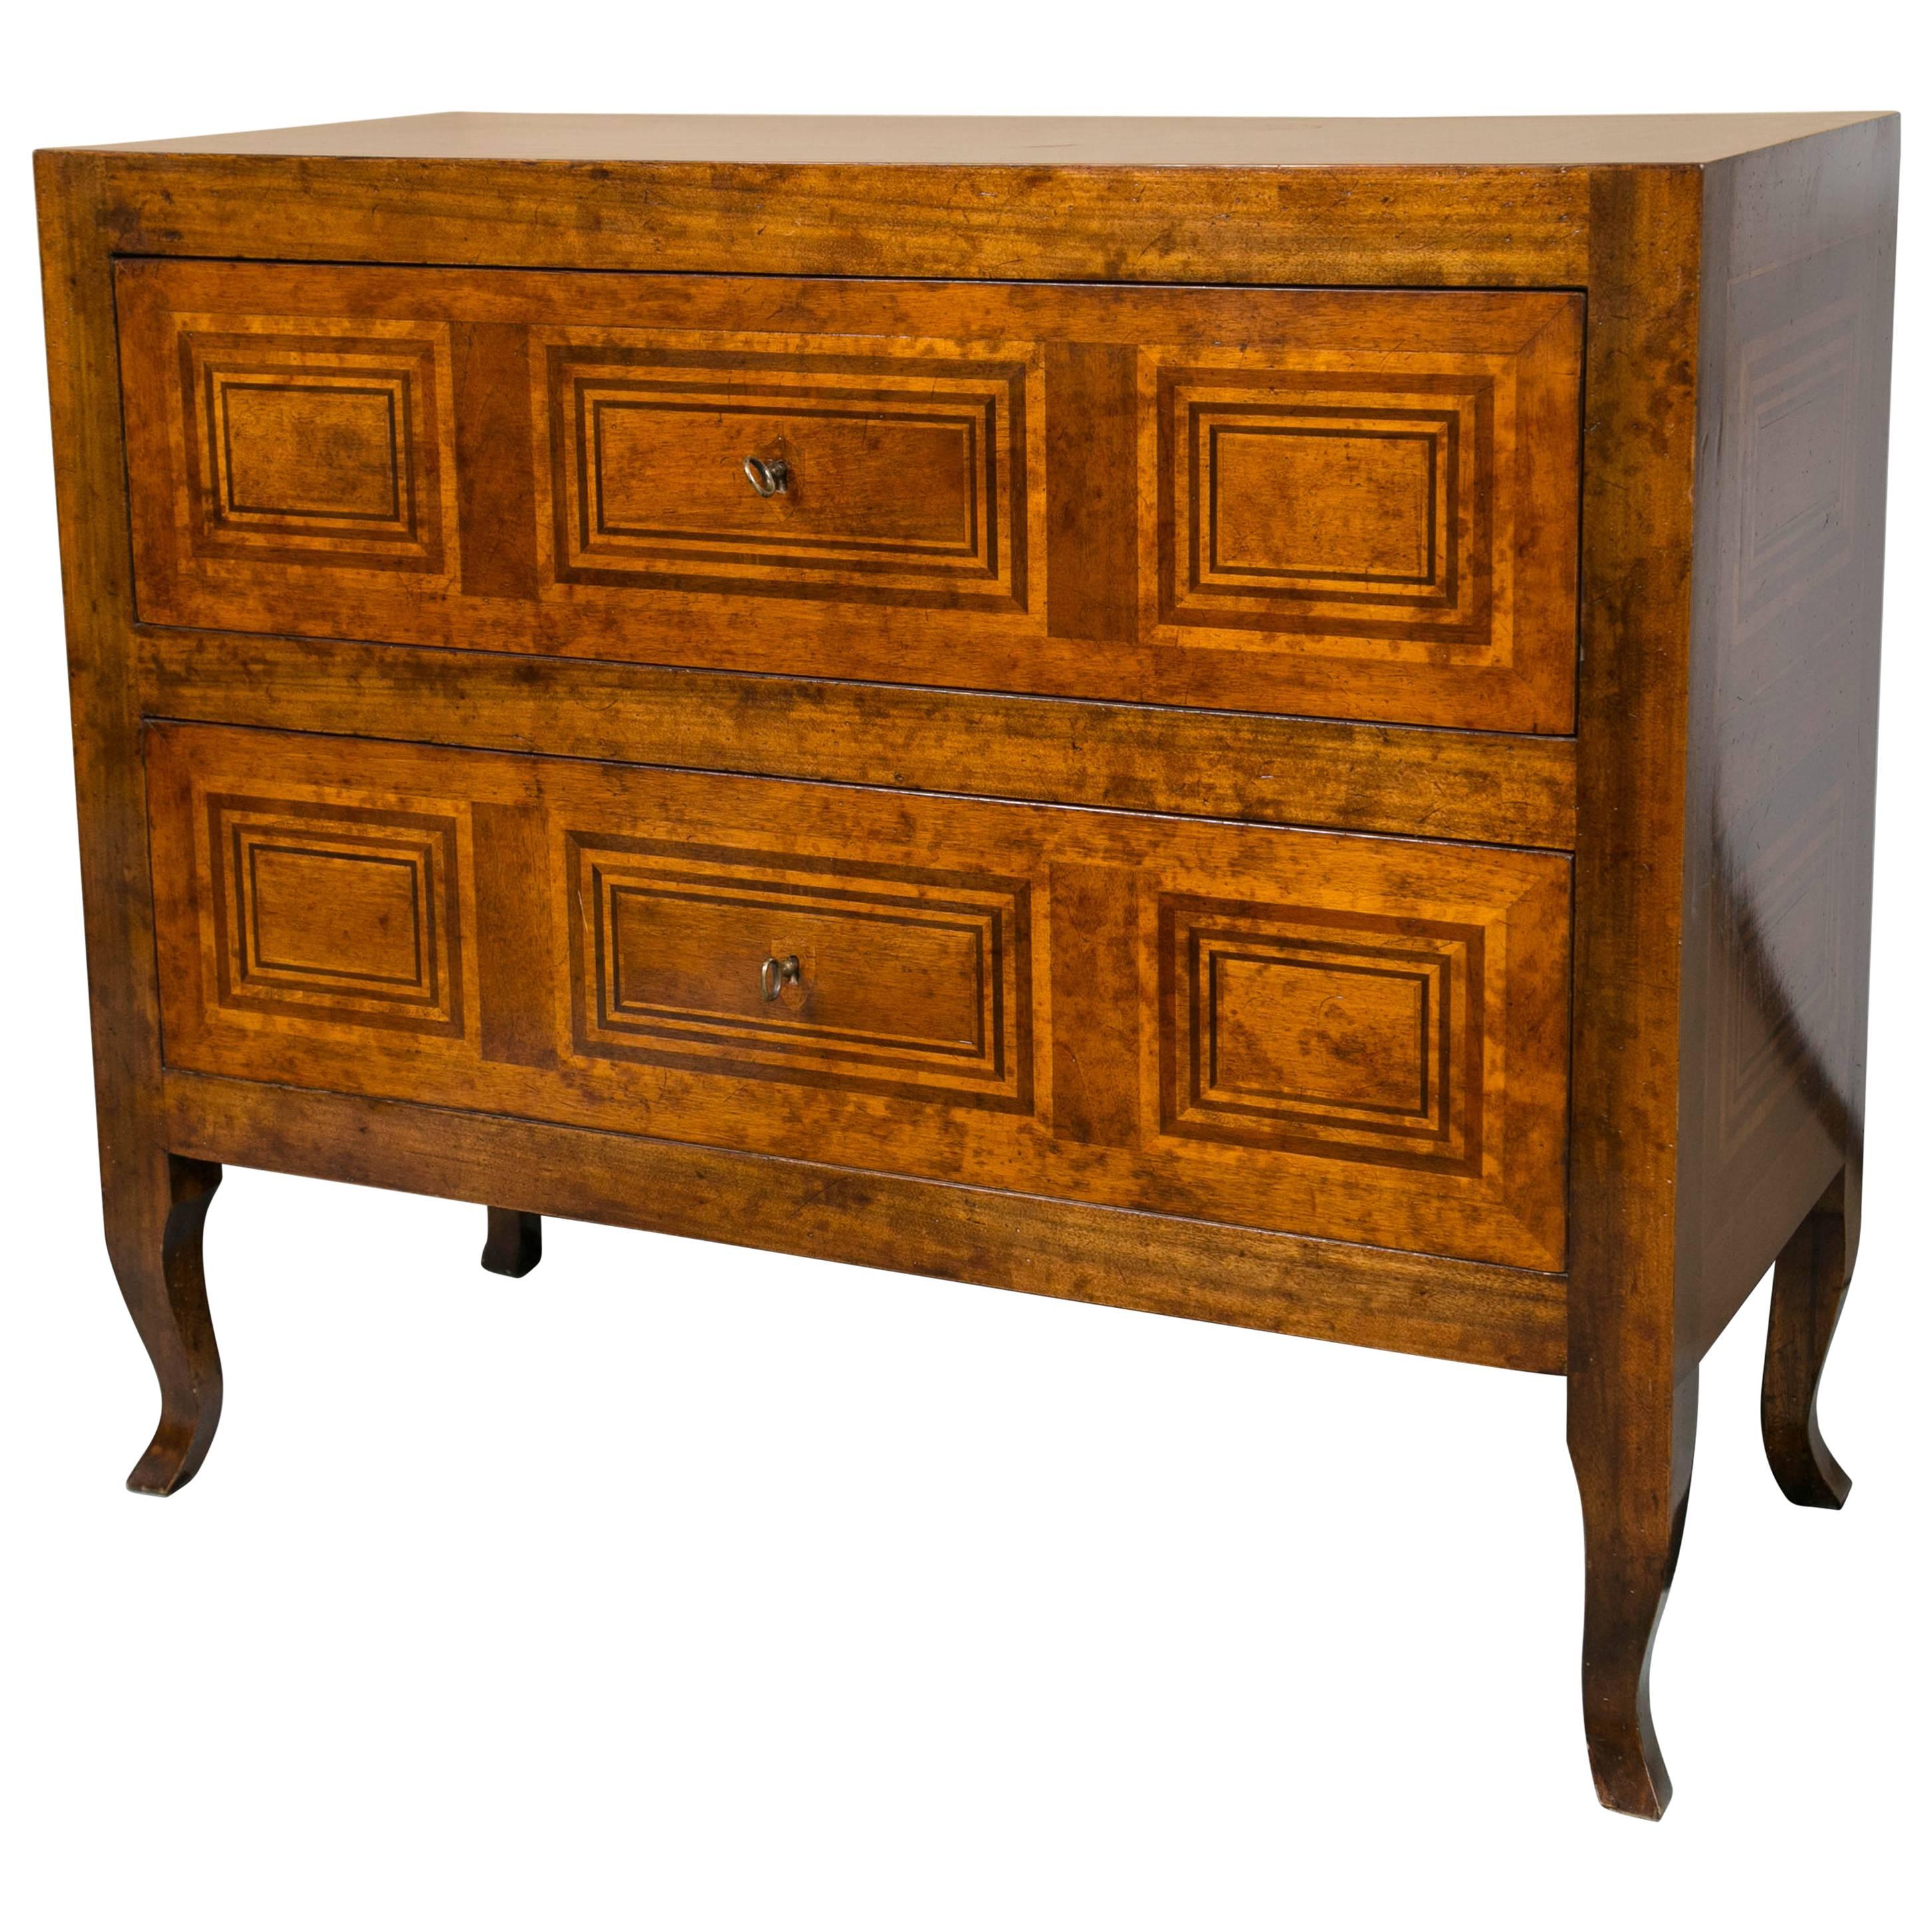 Two-Drawer Italian Handmade Inlaid Continental Style Commode